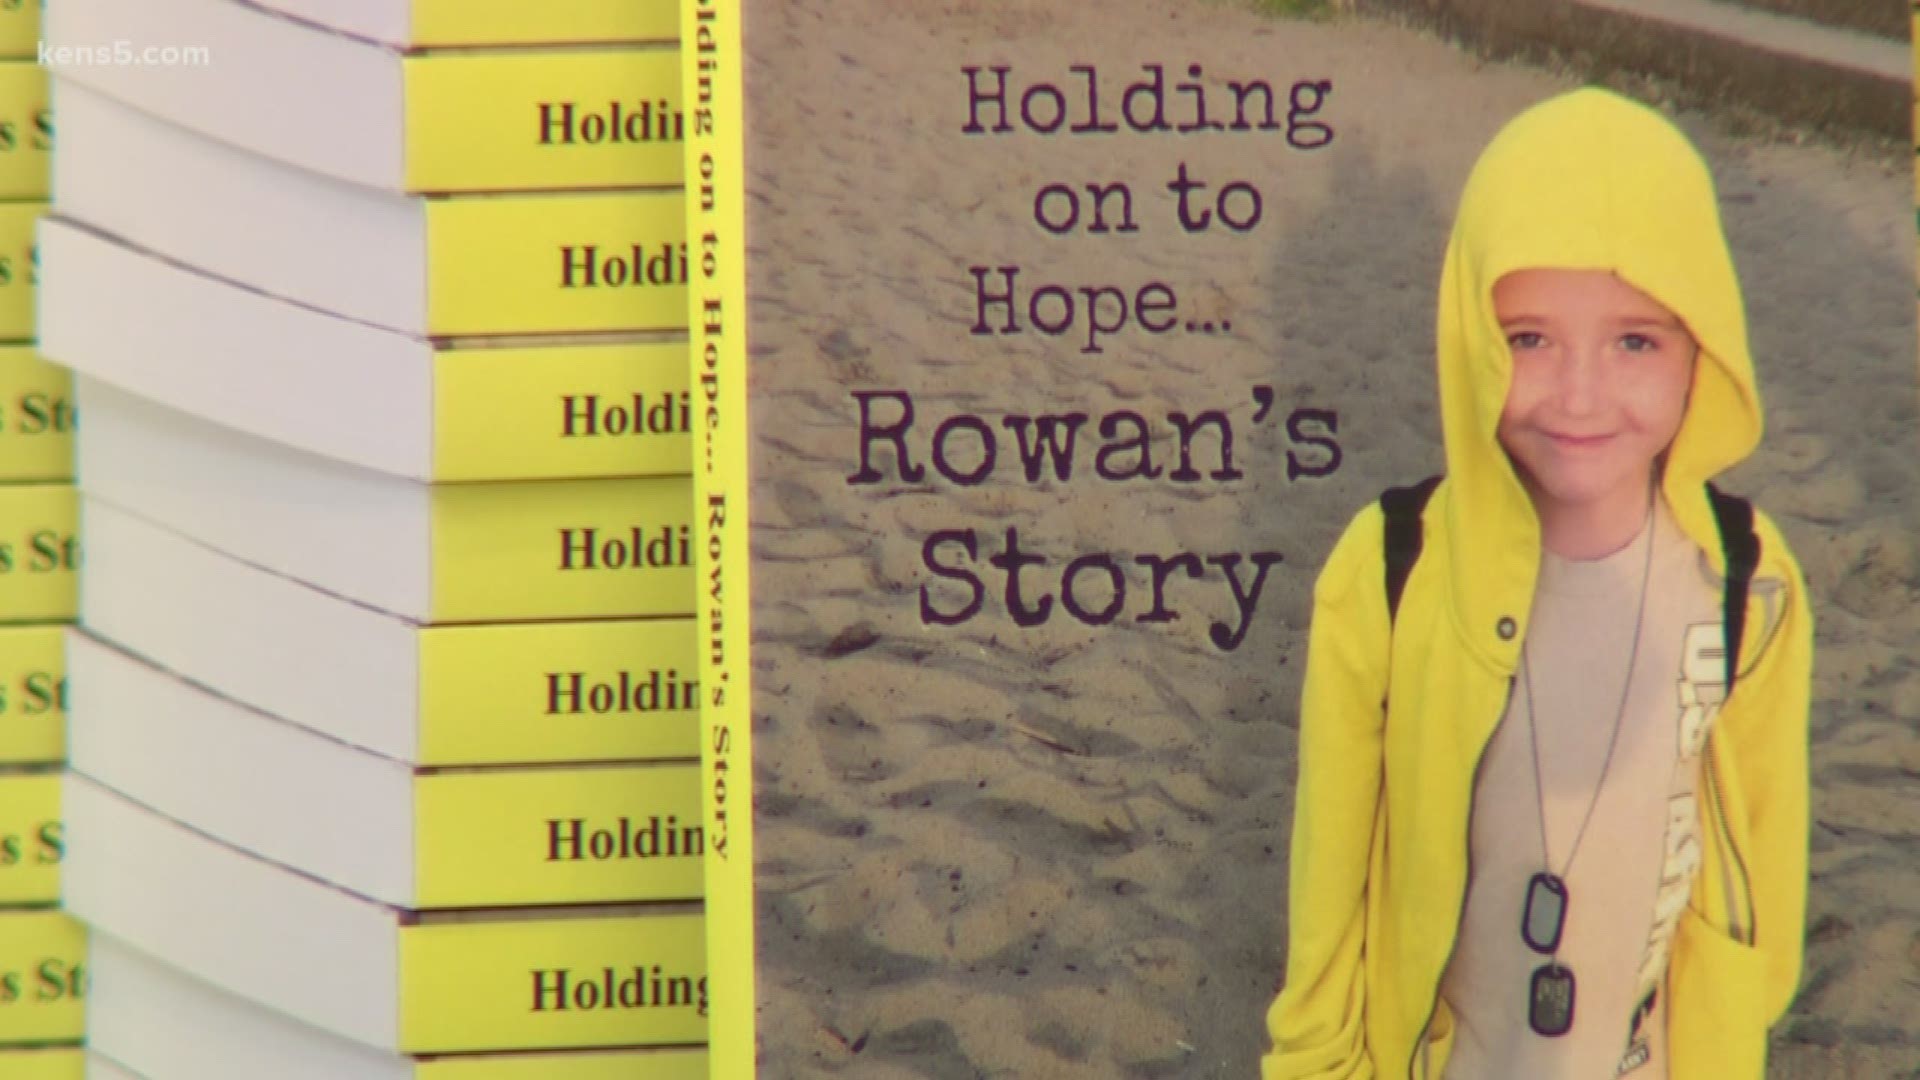 Rowan Windham died after a long battle with a rare and incurable disease. Now, messages from Rowan himself will live on in the pages of a book.